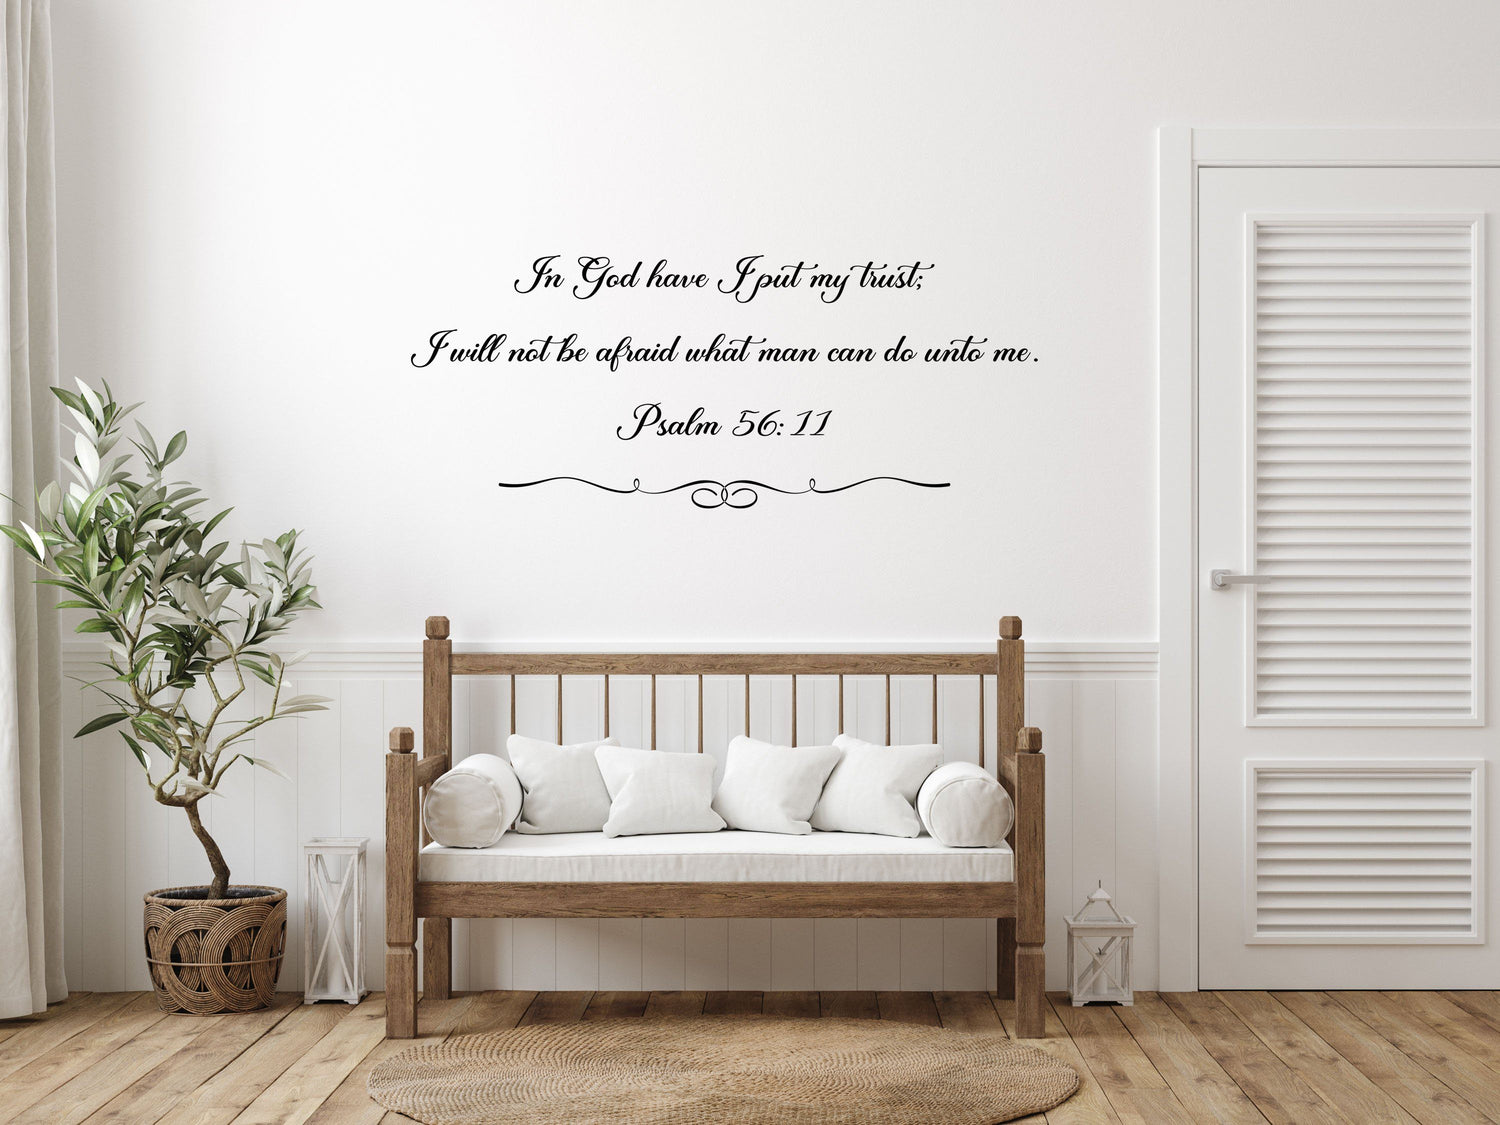 Psalm 56:11 KJV Bible Scripture Decal - In God have I Put My Trust - Bible Verse Decal - Vinyl Wall Decal - Wall Art Scripture Vinyl Wall Decal Done 